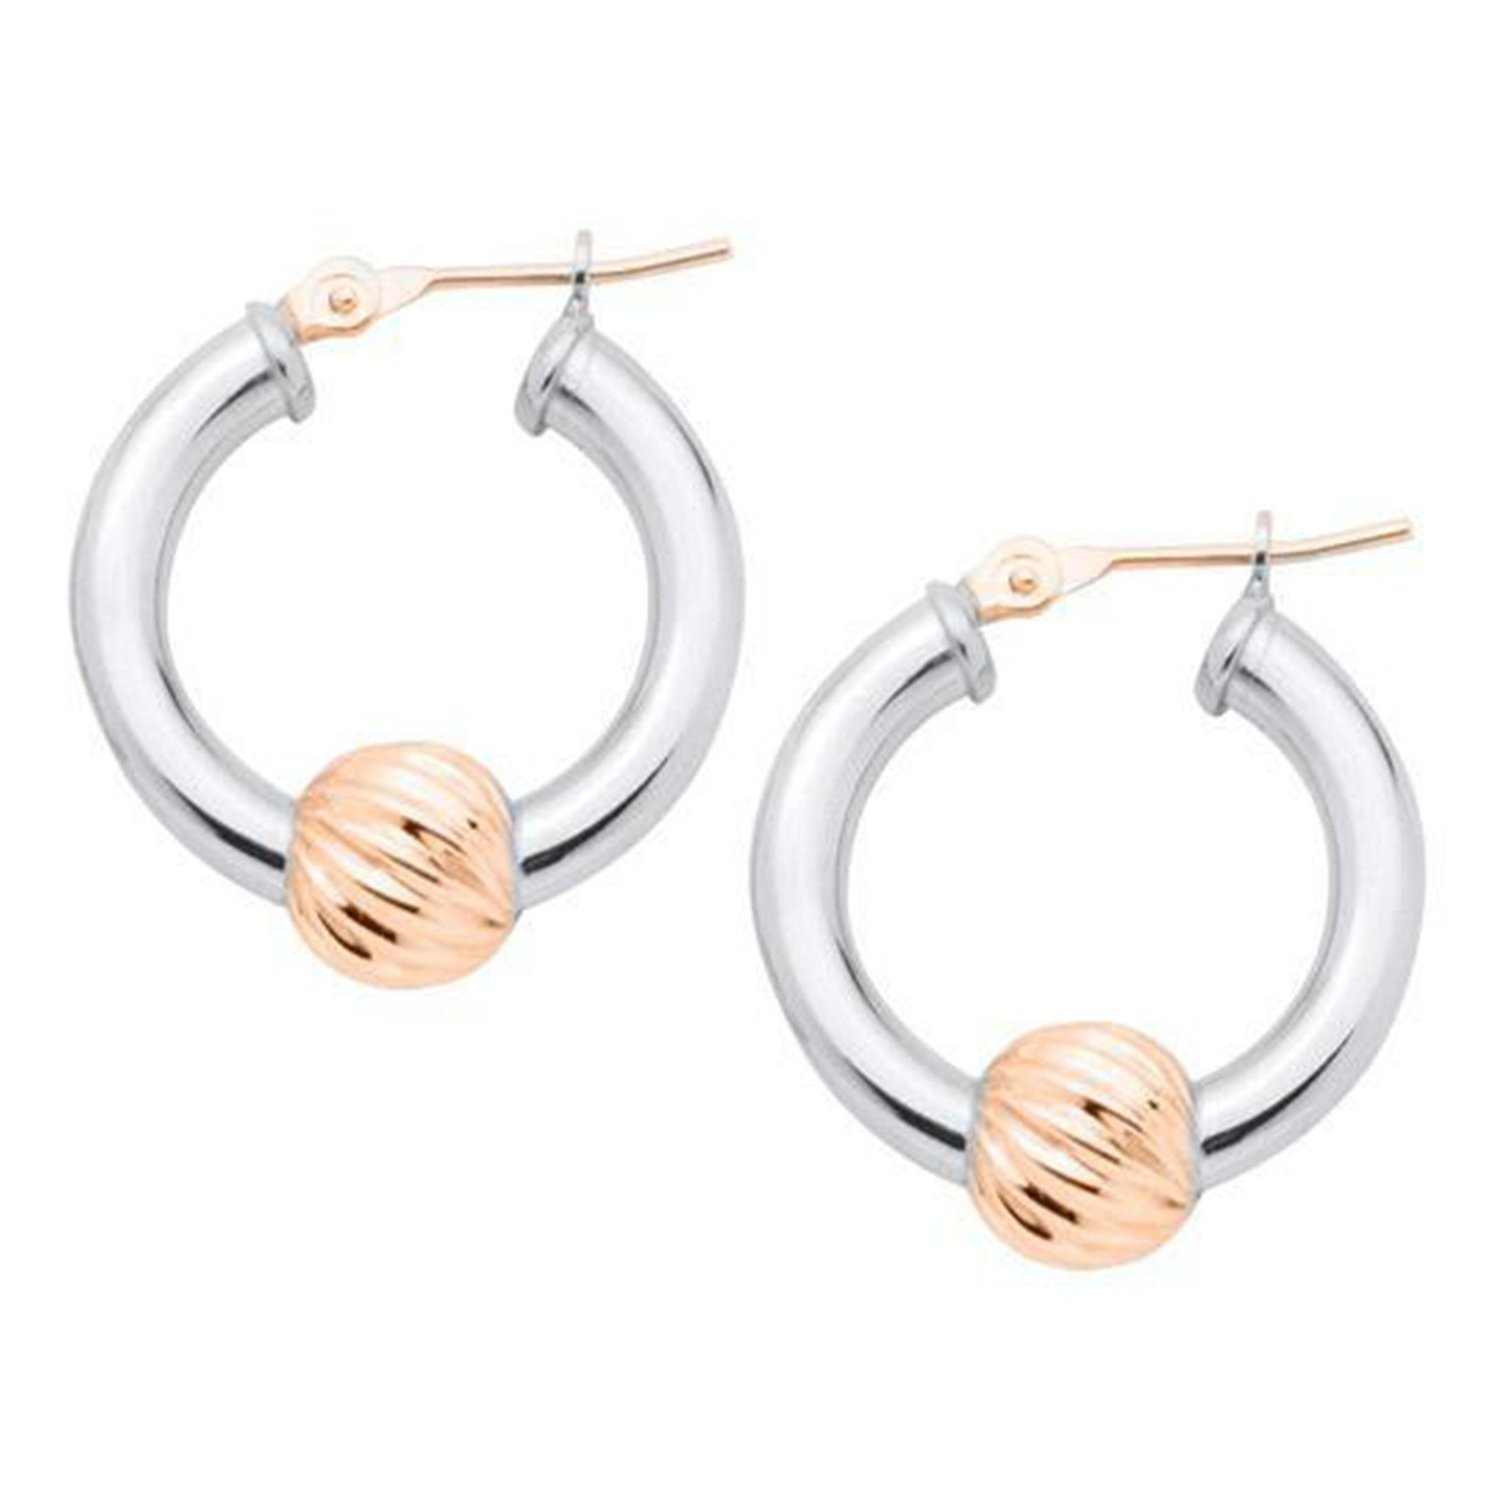 SS and Rose Gold Cape Cod Swirl Hoop Earrings